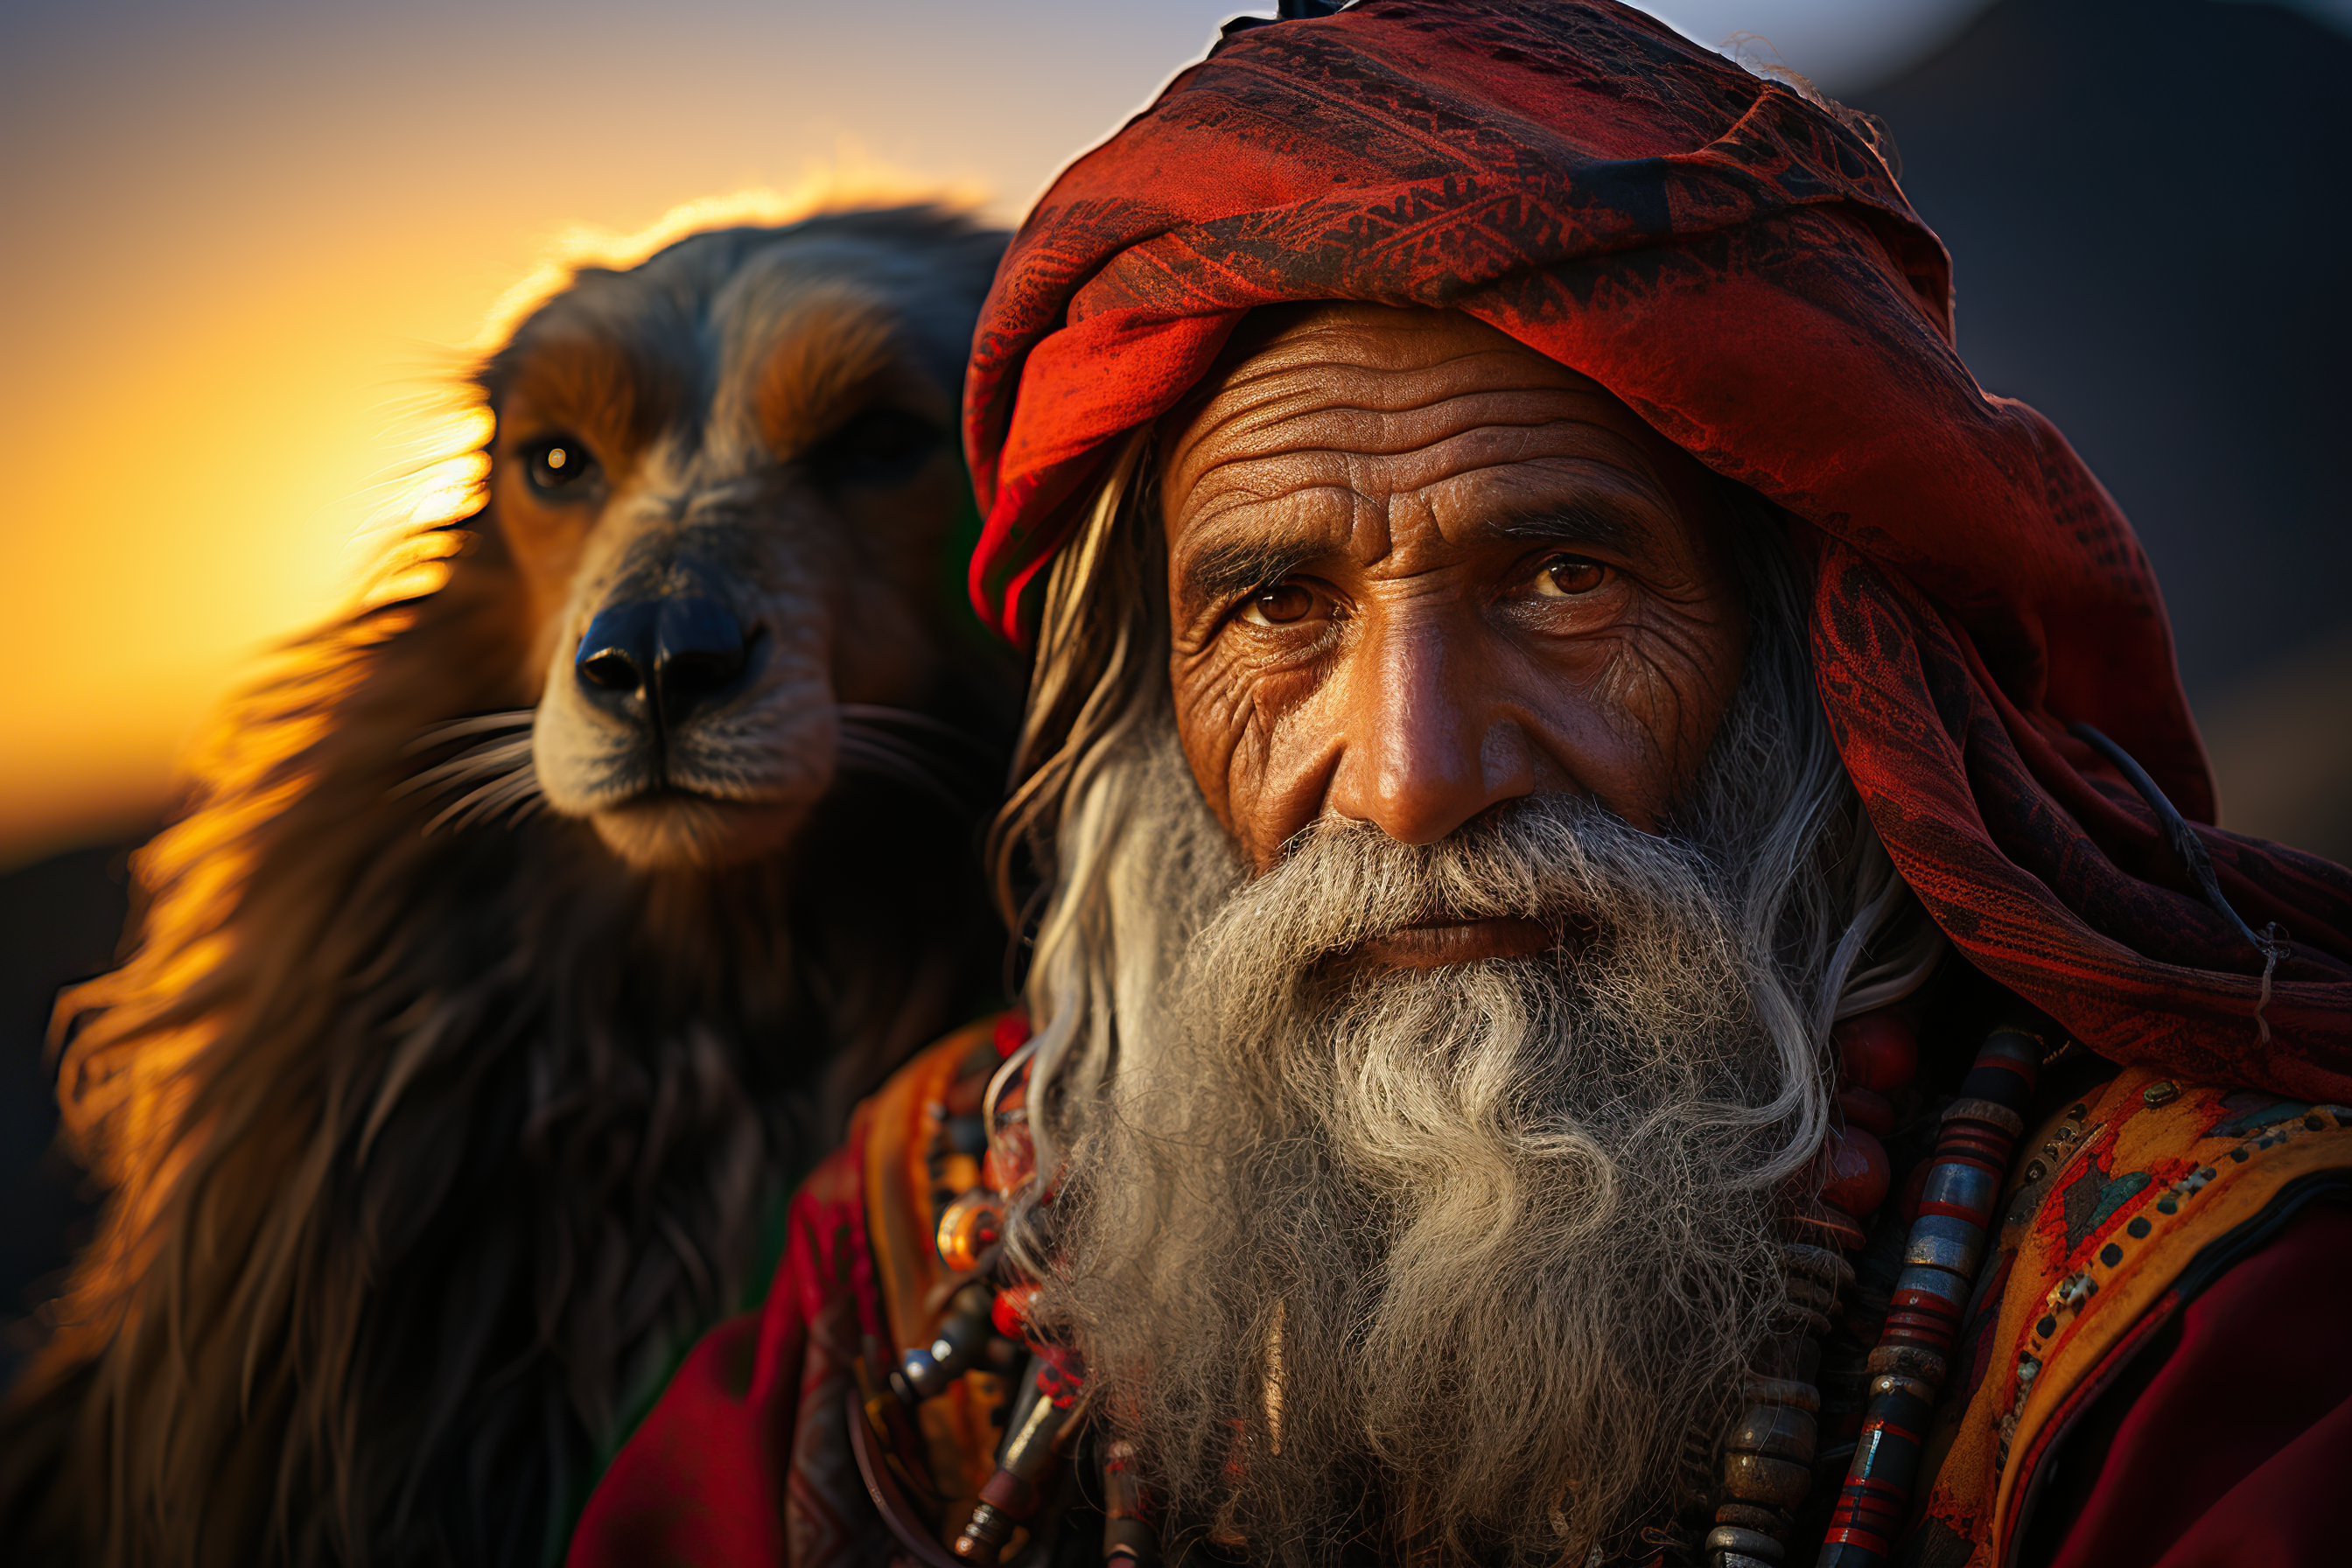 Imperessive shot of an old arab man with his dog